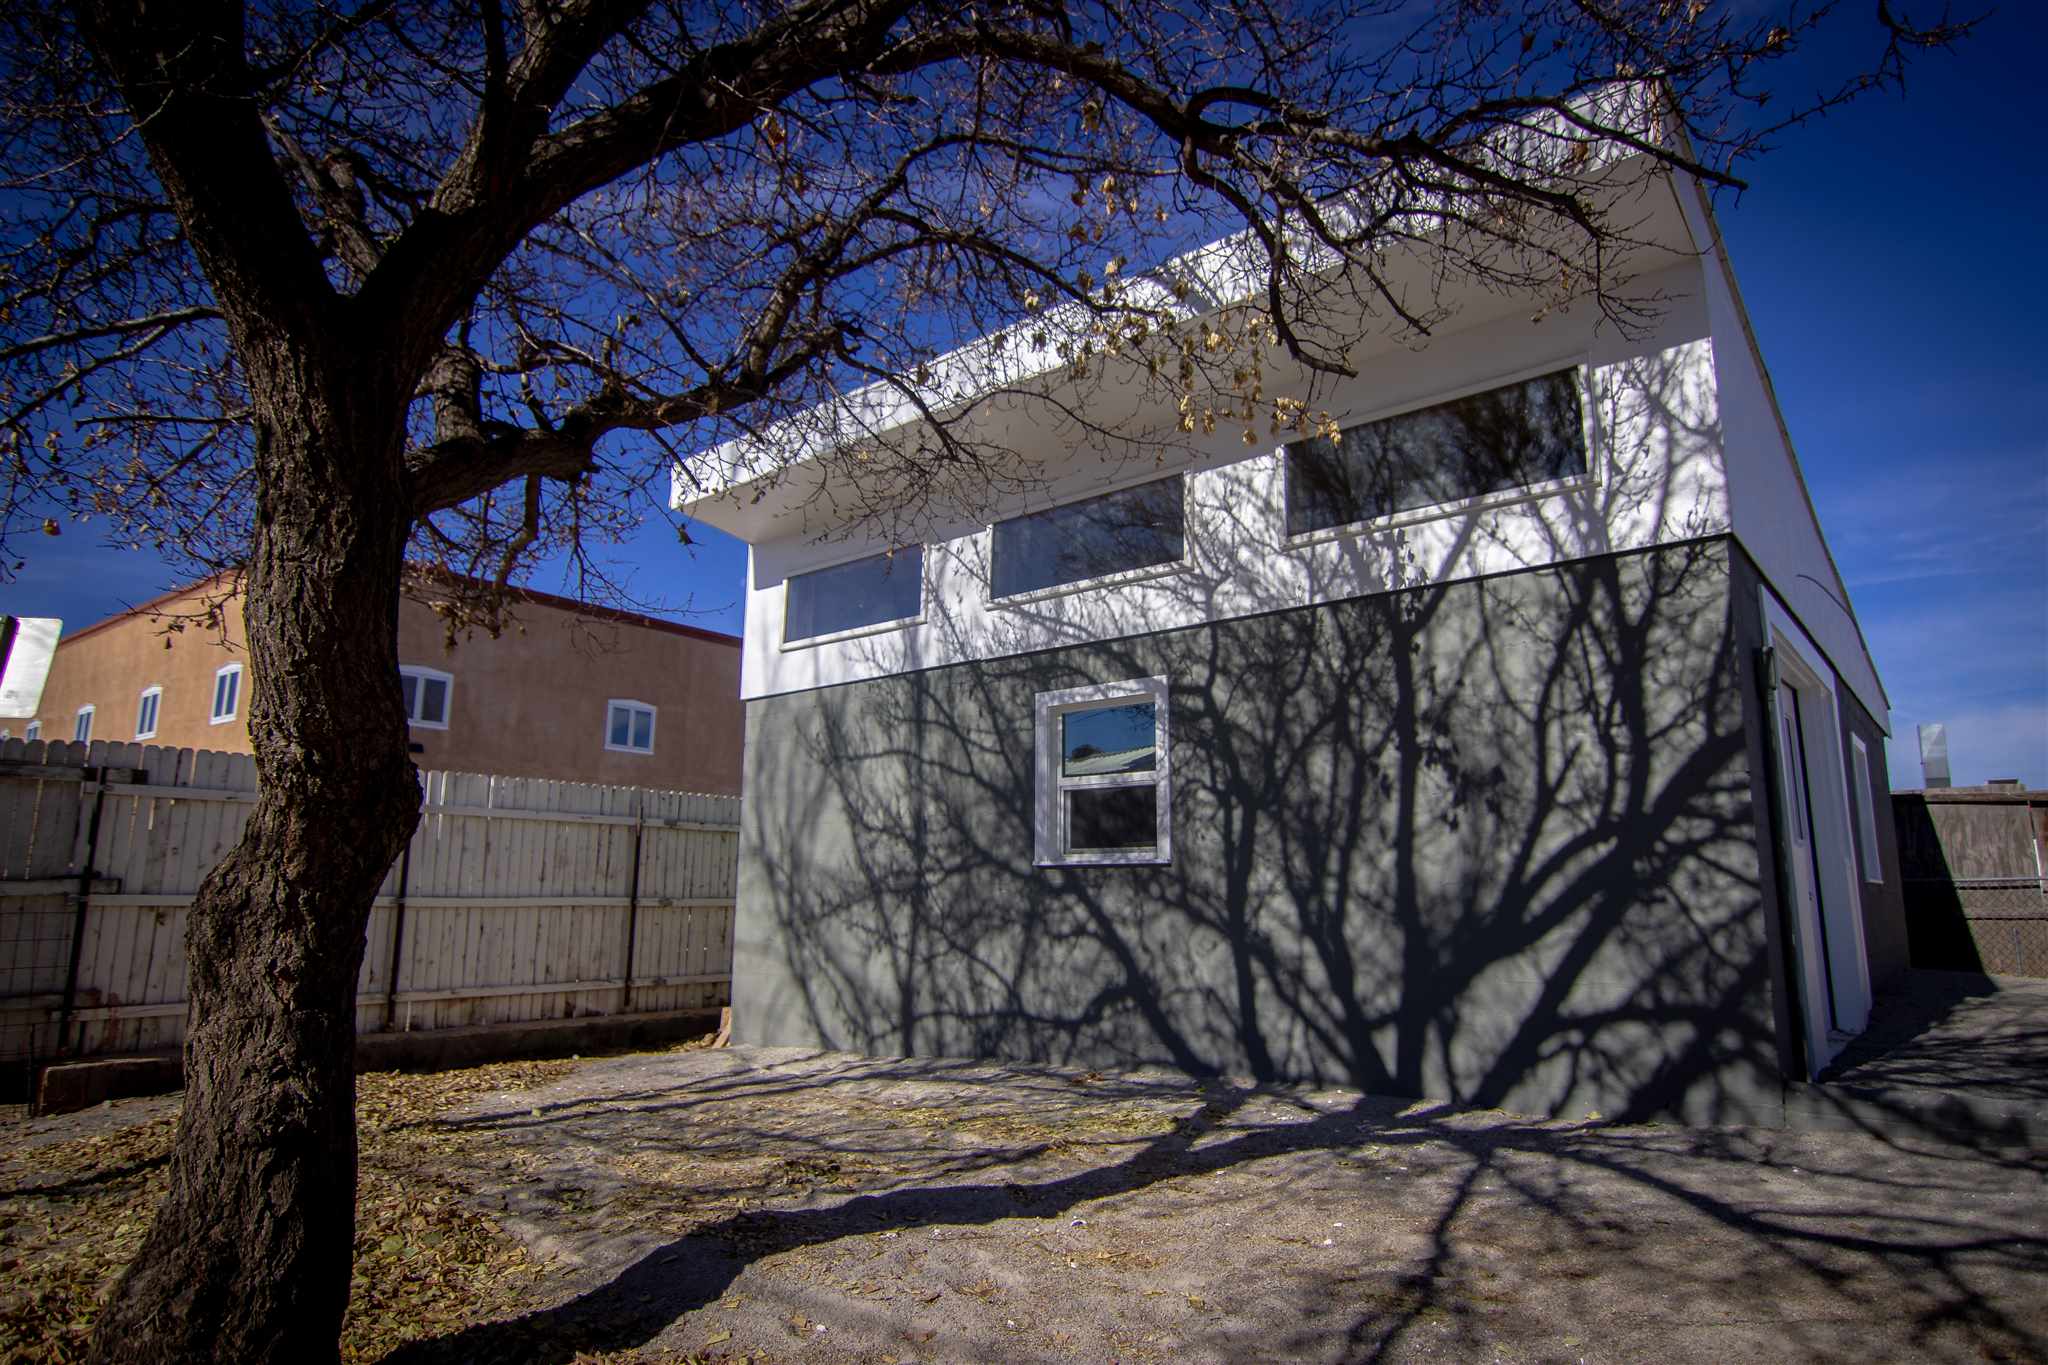 1526 Fifth, Santa Fe, New Mexico 87505, 3 Bedrooms Bedrooms, ,2 BathroomsBathrooms,Residential,For Sale,1526 Fifth,201905137